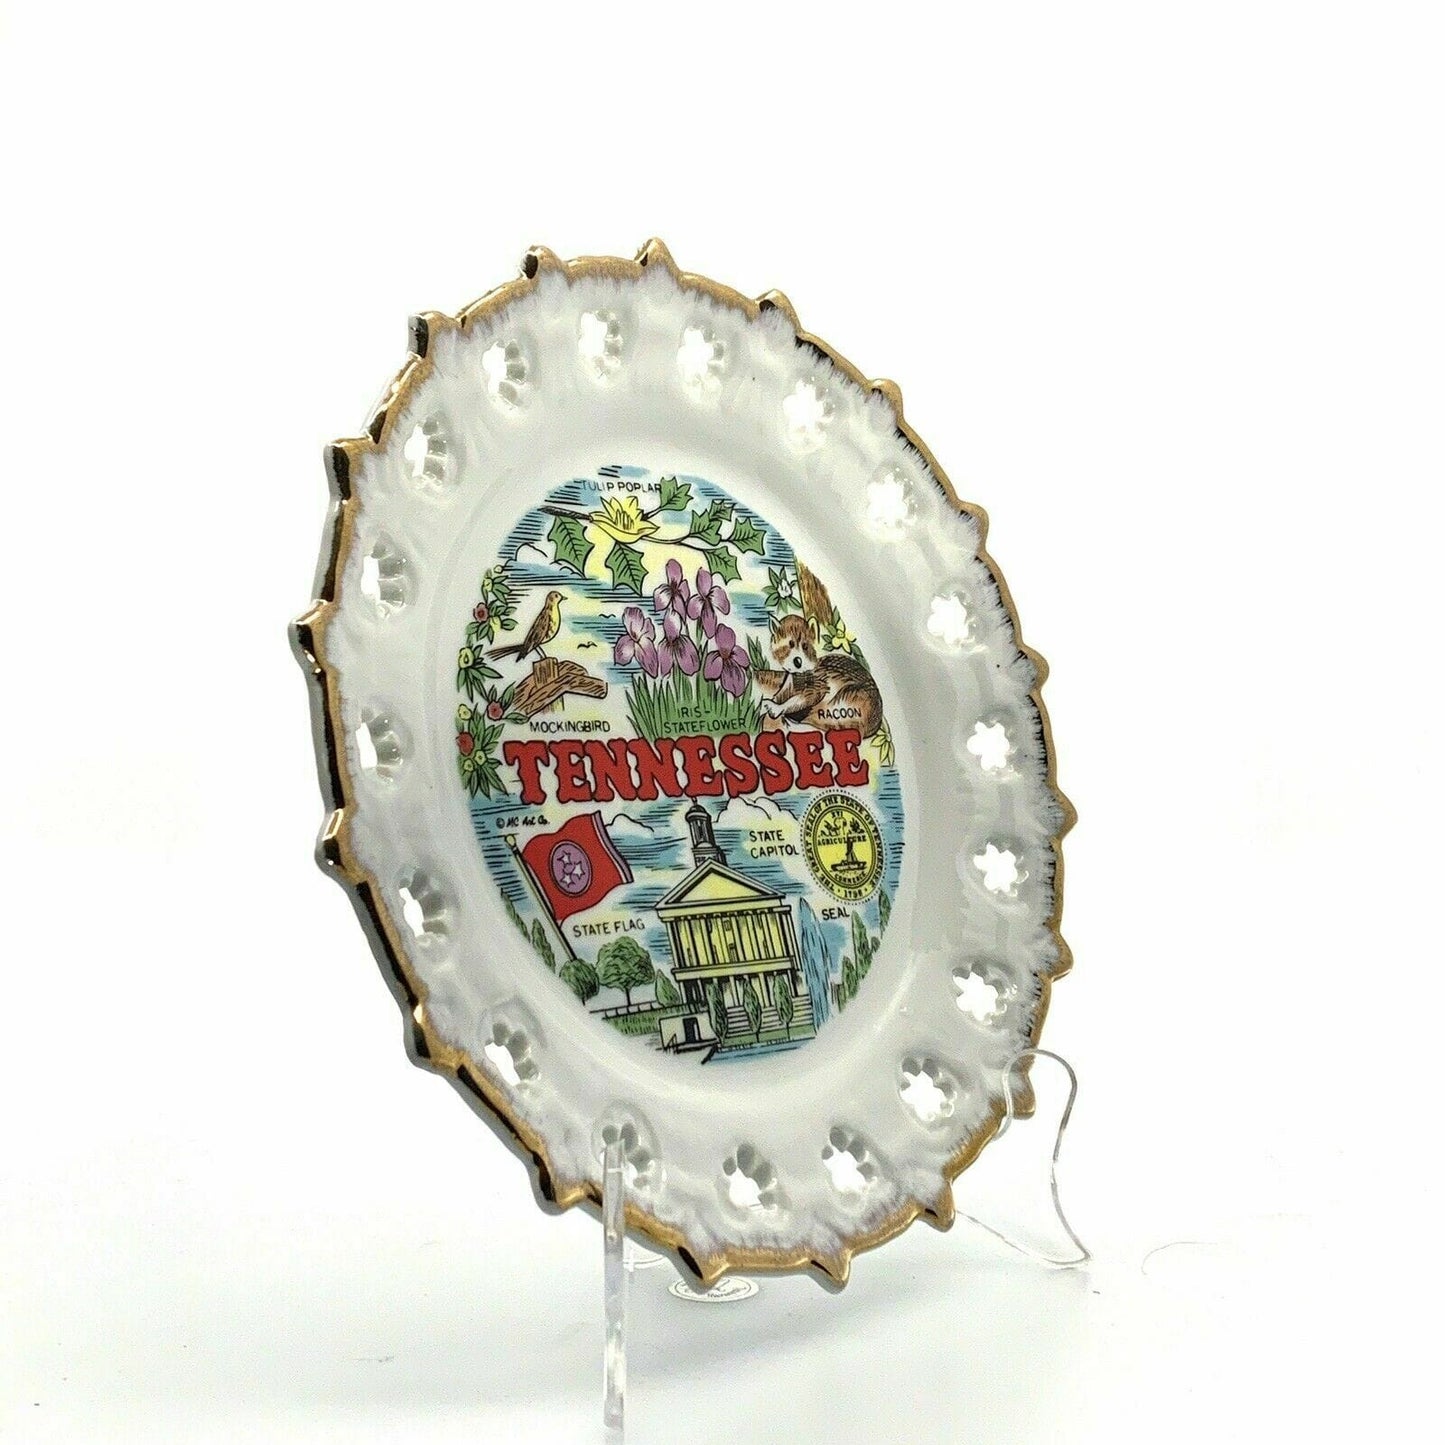 State Of Tennessee Souvenir Collectible Plate, White - 9”